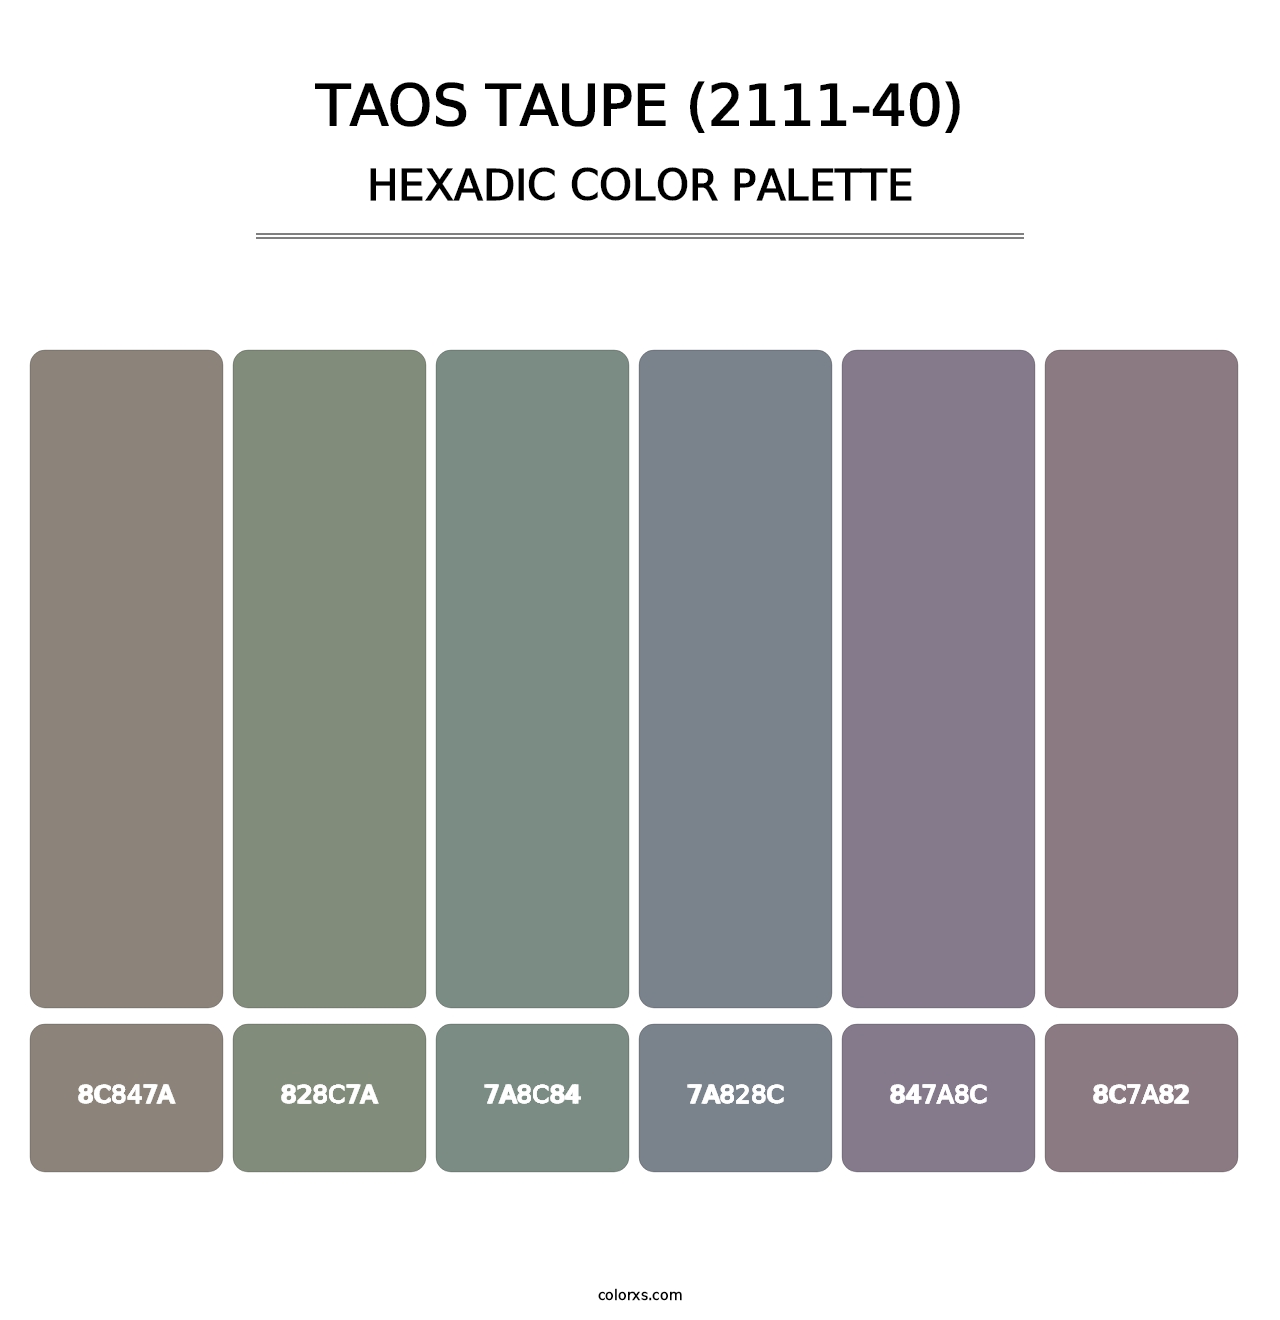 Taos Taupe (2111-40) - Hexadic Color Palette